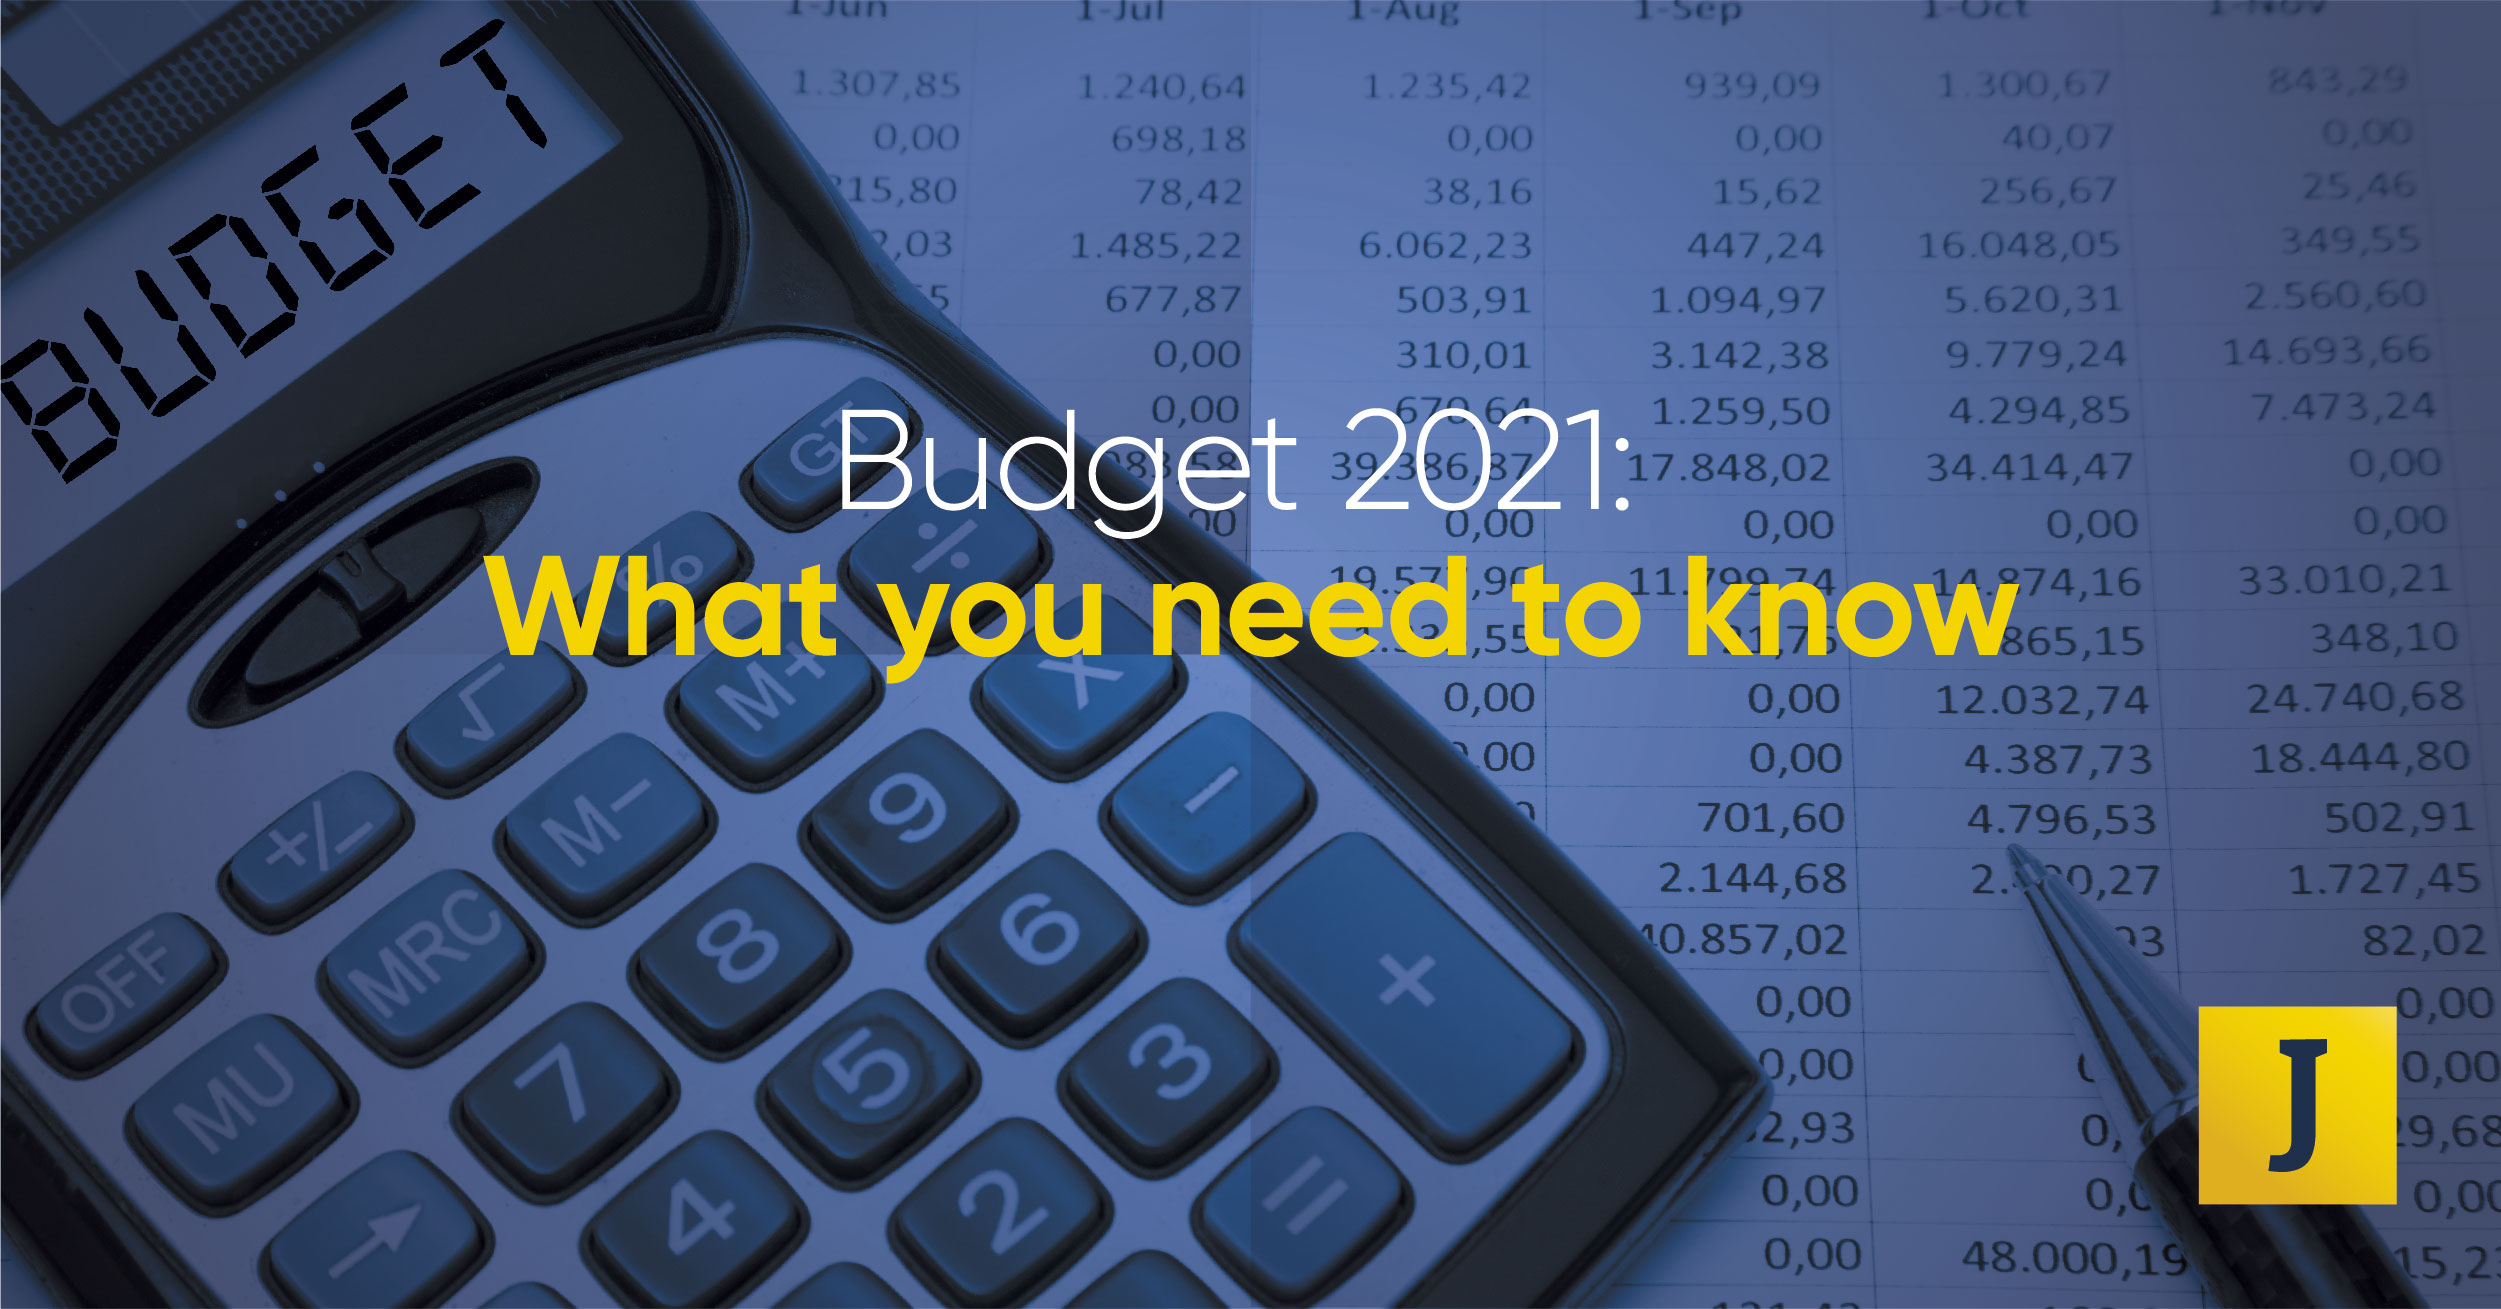 The budget 2021 what you need to know